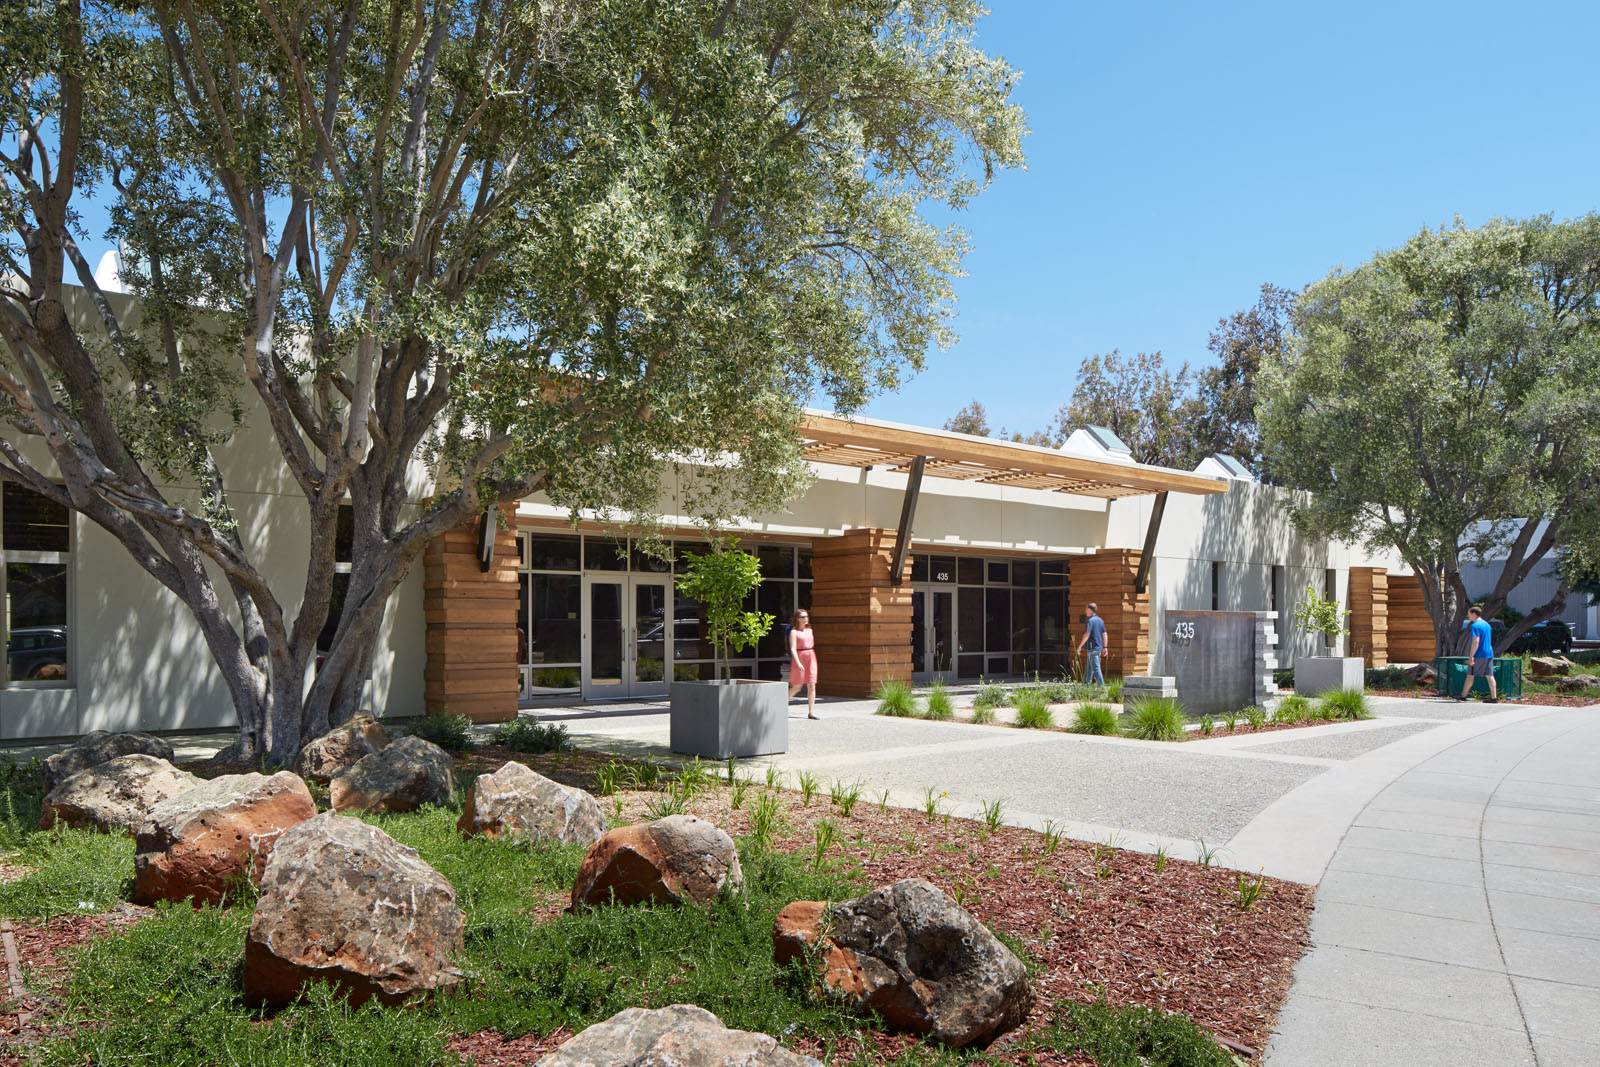 GreenBiz Names 435 Indio One of Five Game-Changing Green Buildings of 2014